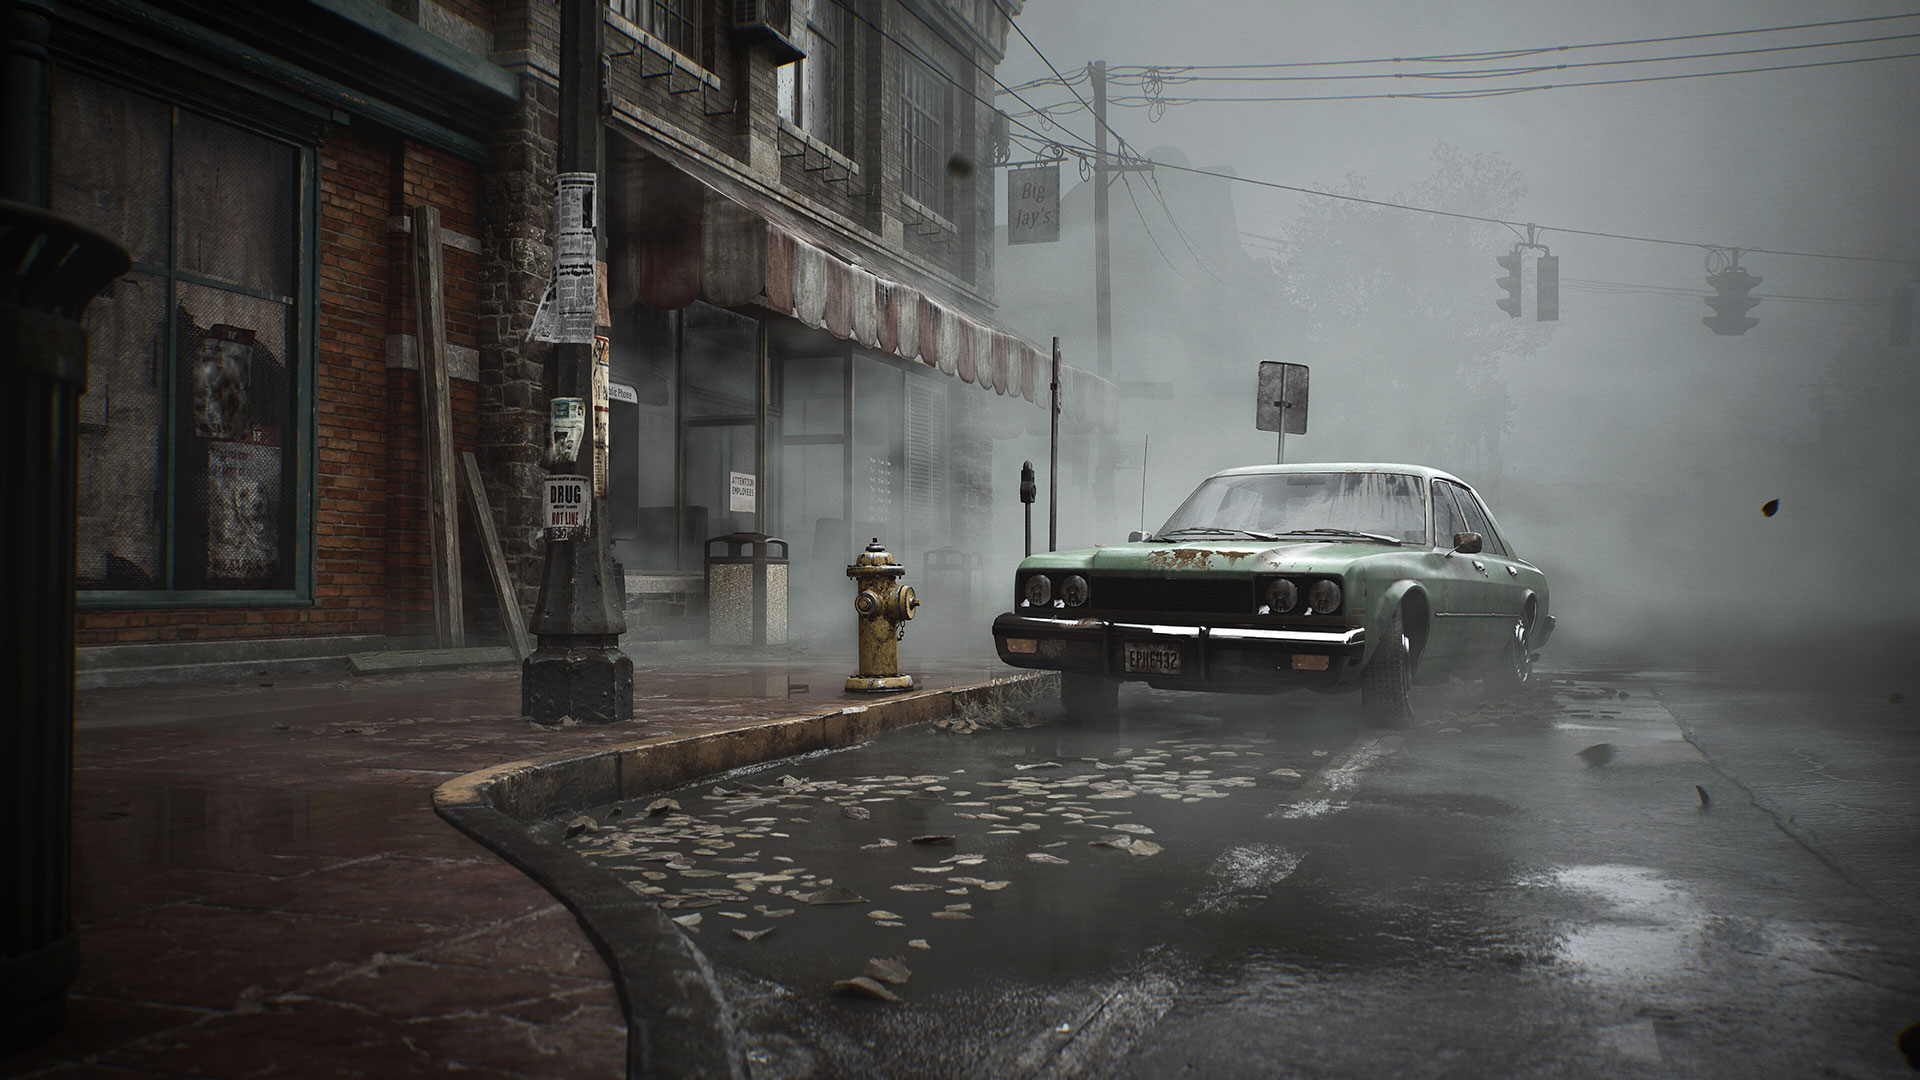 Get all the details on the upcoming Silent Hill 2 remake